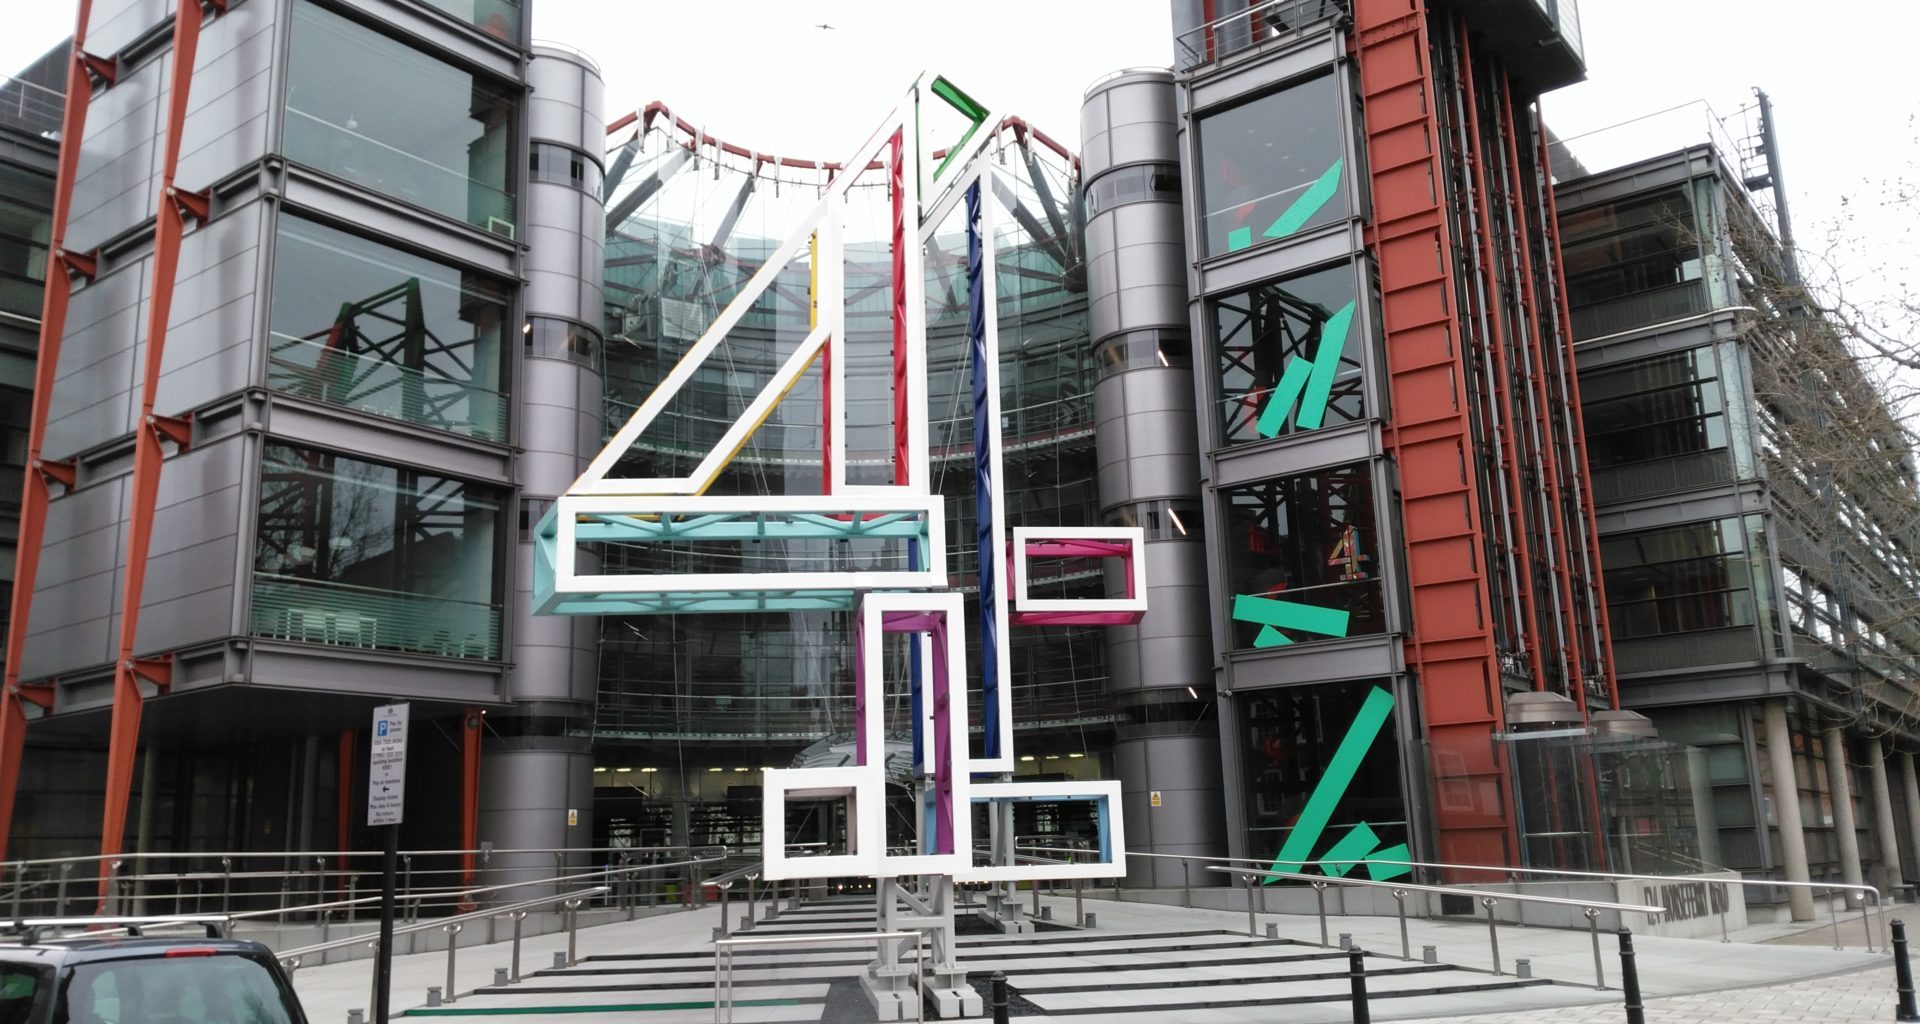 Claim Channel 4 is funded by taxpayers is False 6